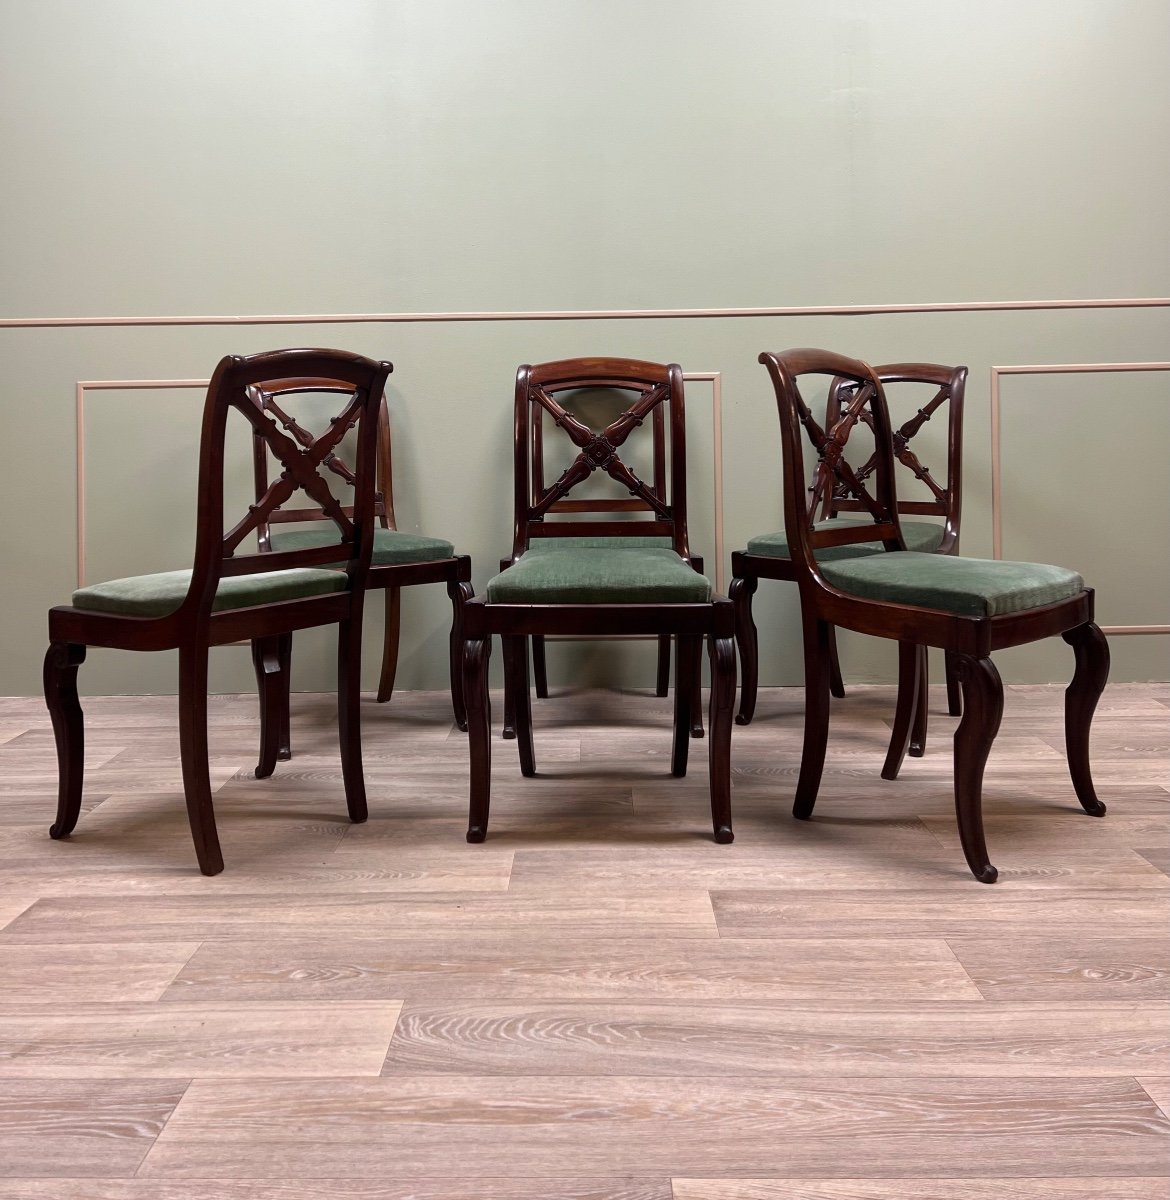 Beautiful Suite Of Six Restoration Period Mahogany Chairs With Cross Backs 19th Century-photo-2